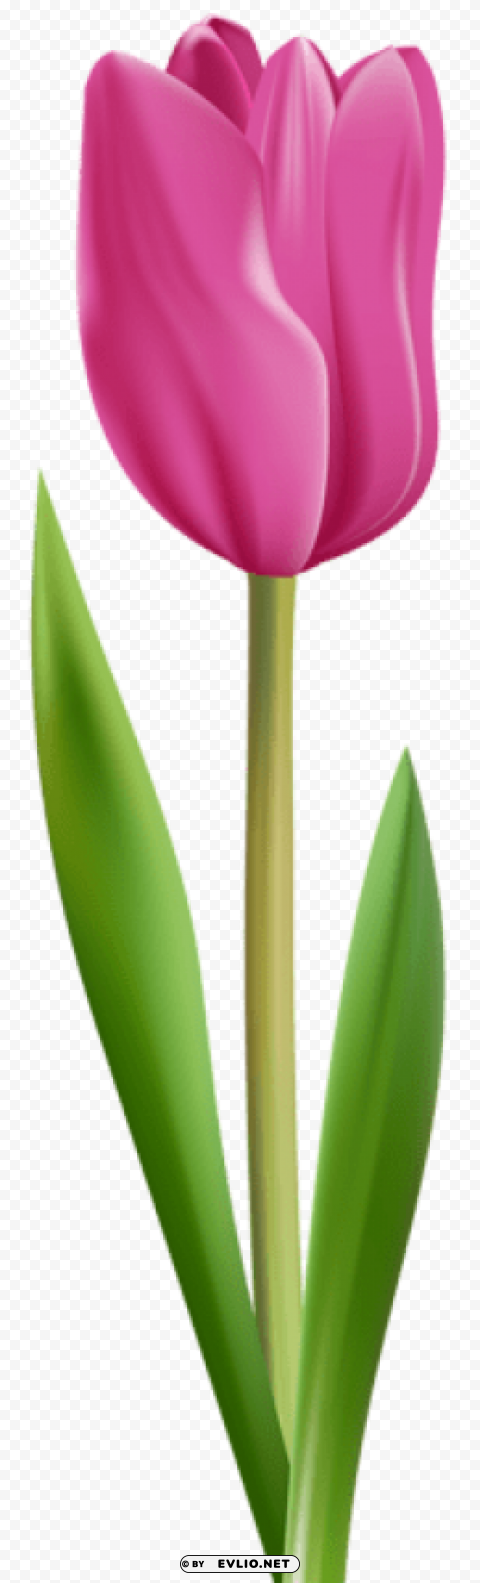 tulip pink transparent Isolated Artwork in HighResolution PNG